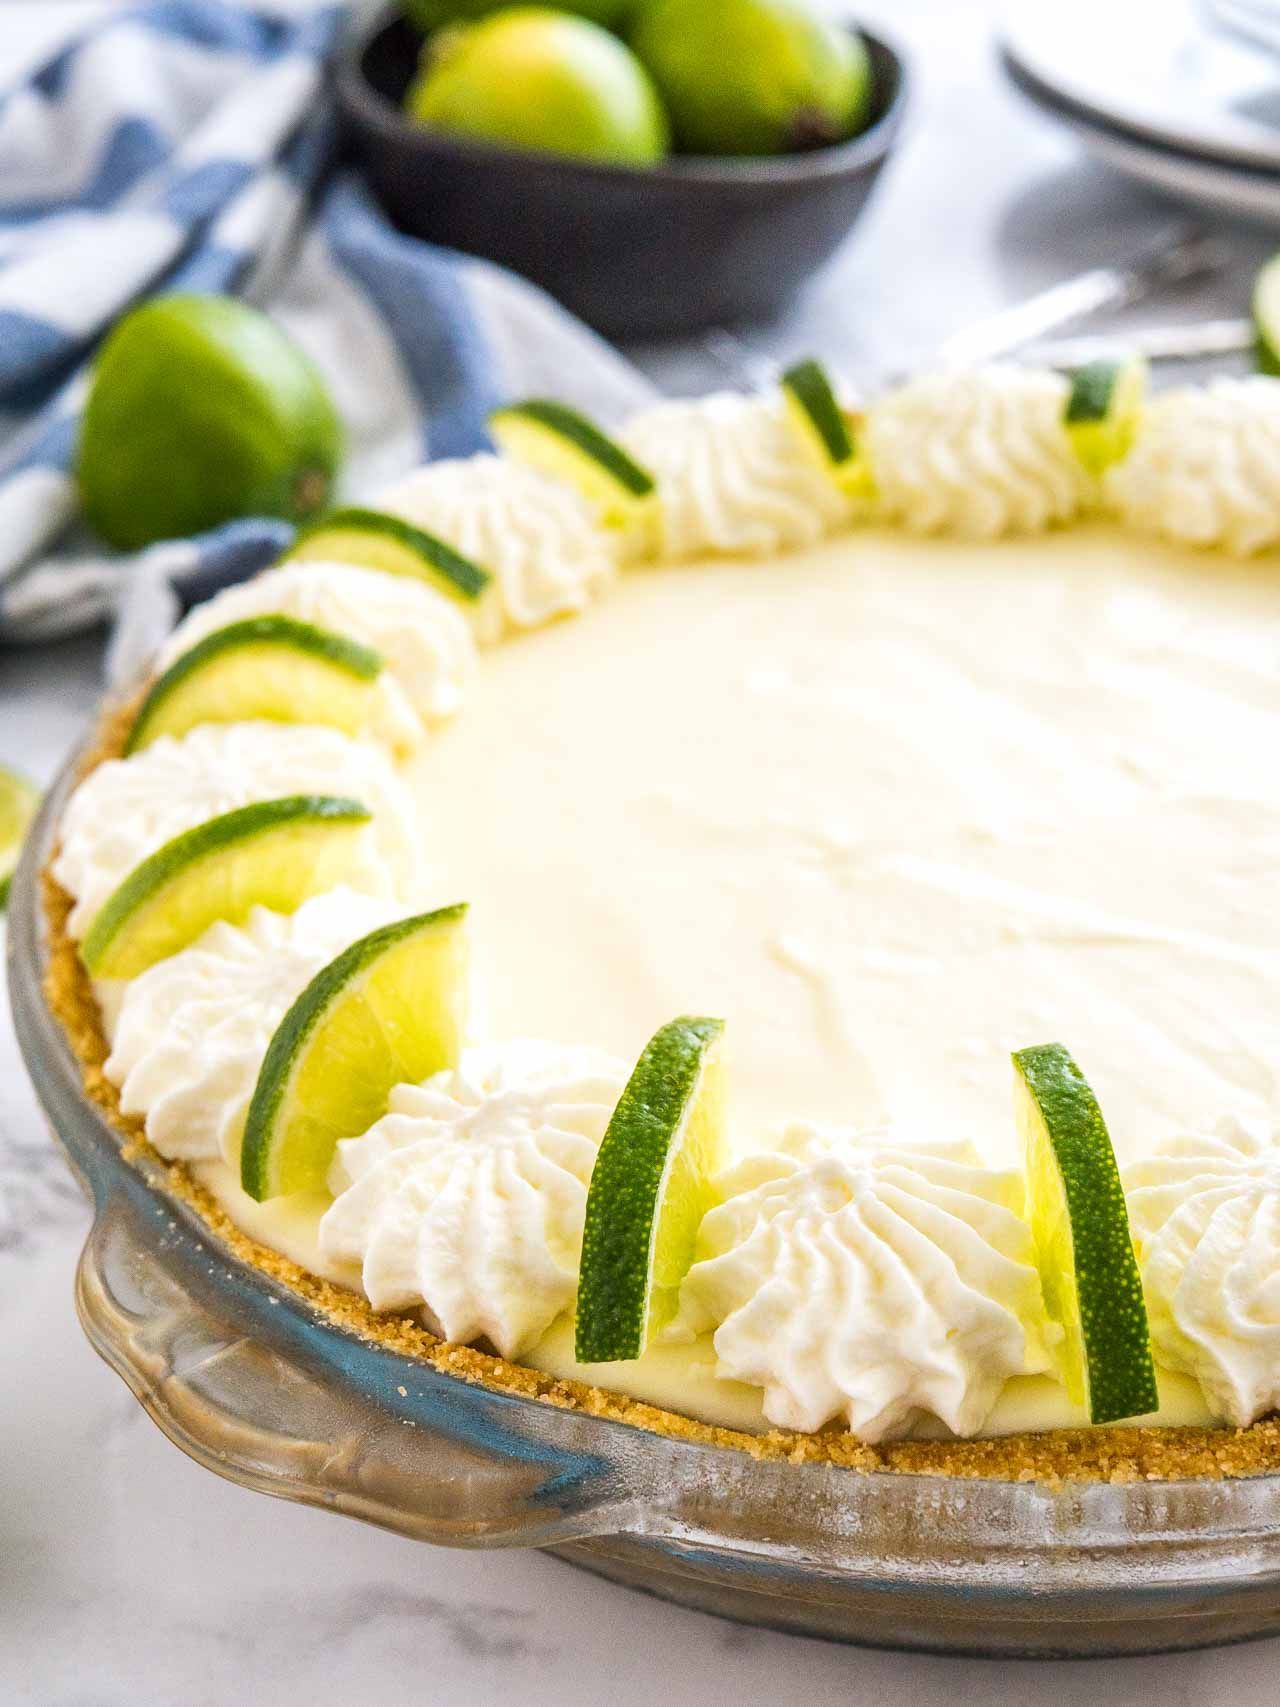 No Bake Key Lime Pie {Key Lime Cream Pie} | Plated Cravings -   18 desserts Summer lime pie ideas